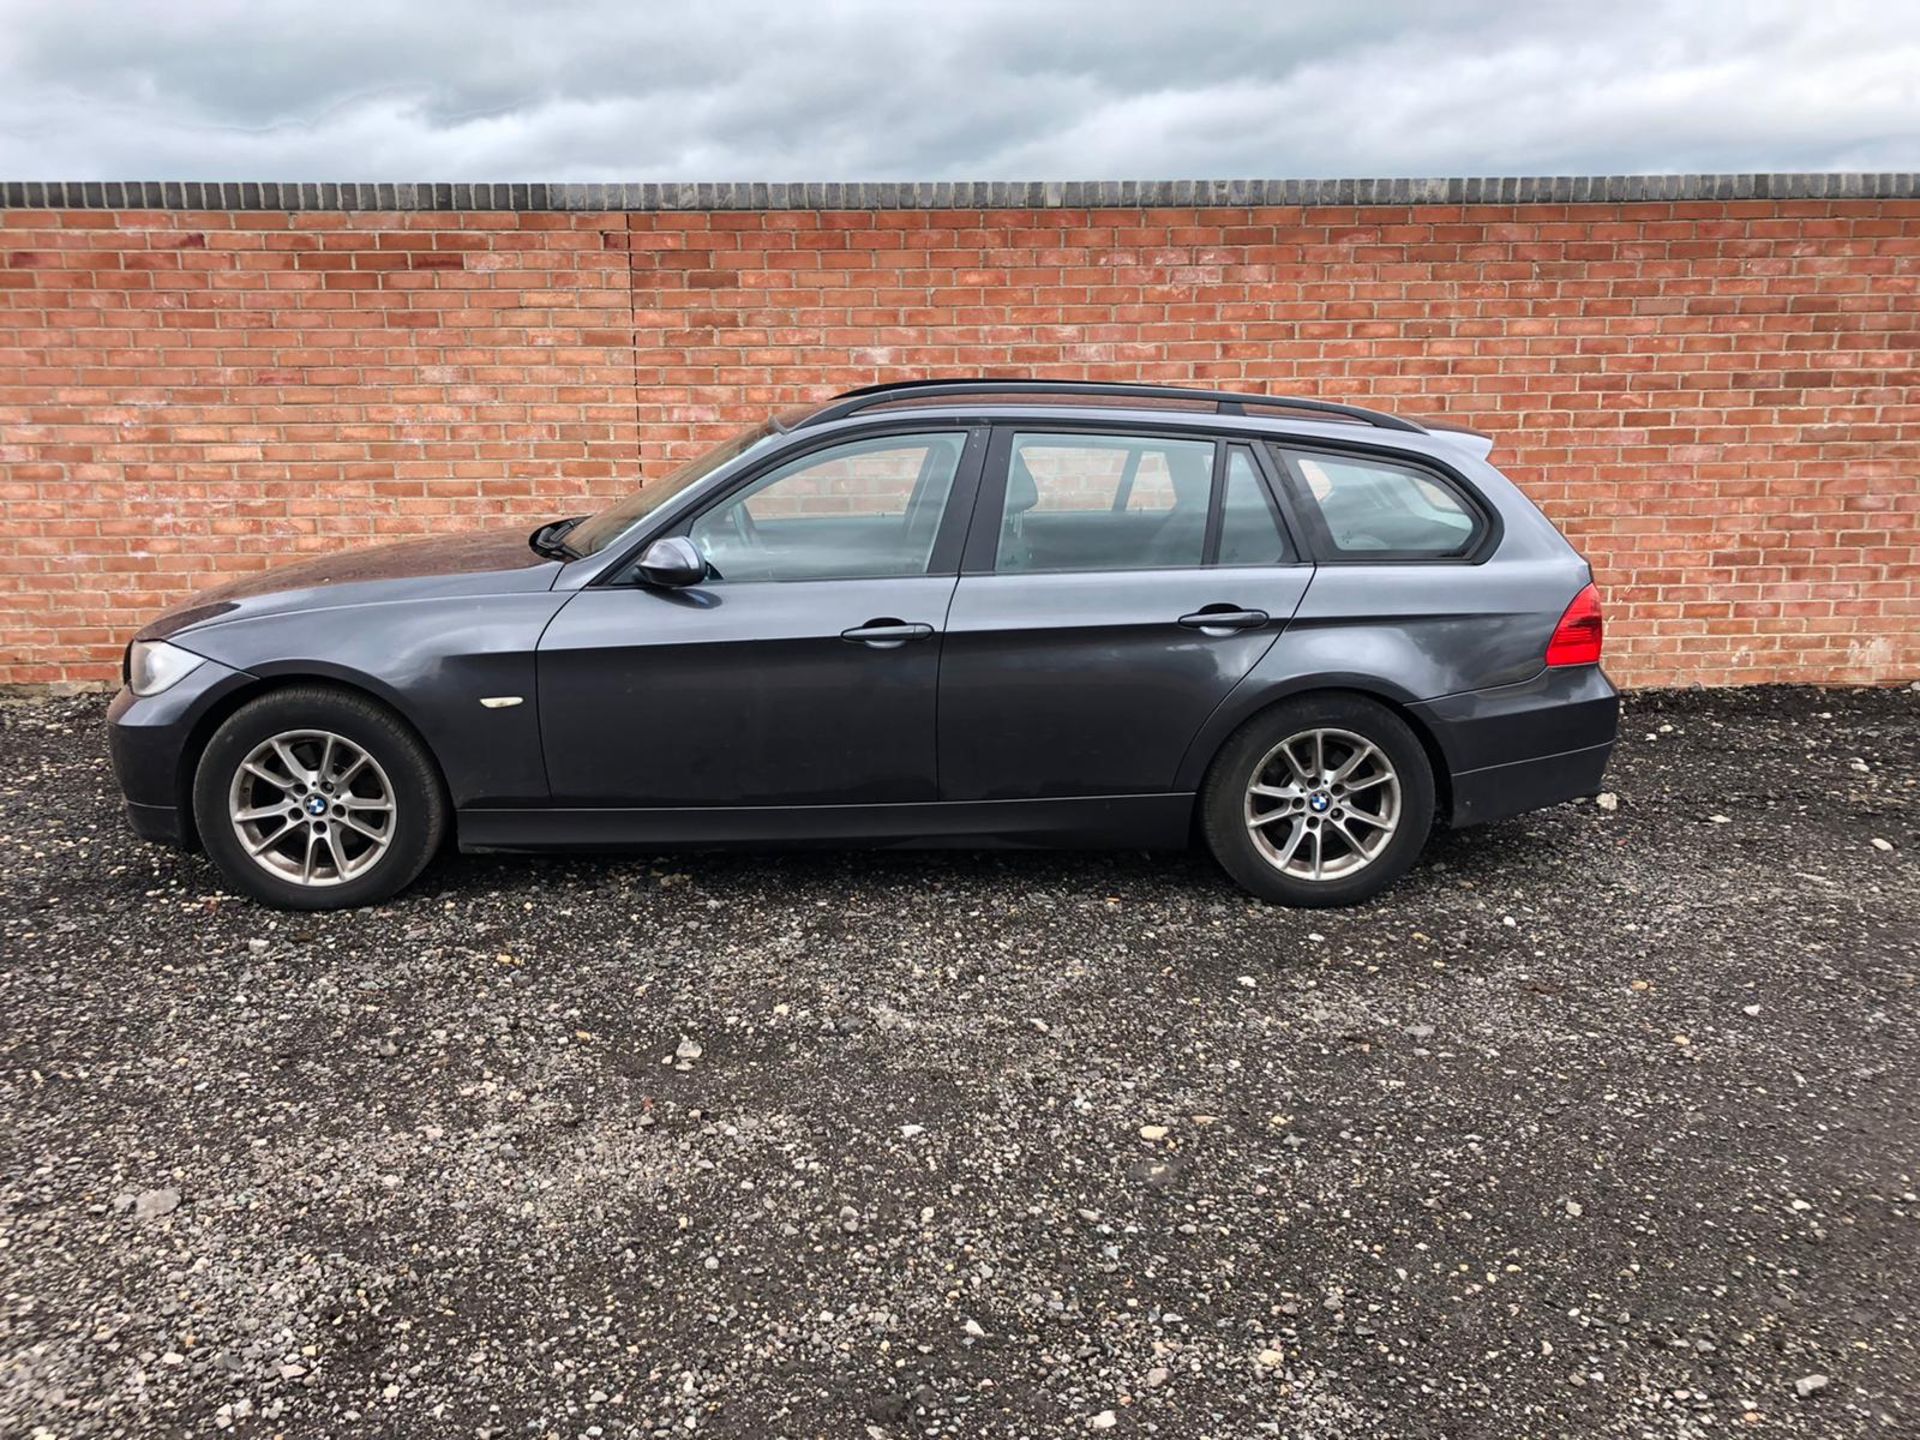 2008 BMW 318D EDITION ES TOURING GREY ESTATE, 2.0 DIESEL ENGINE, 6 PREVIOUS KEEPERS *NO VAT*